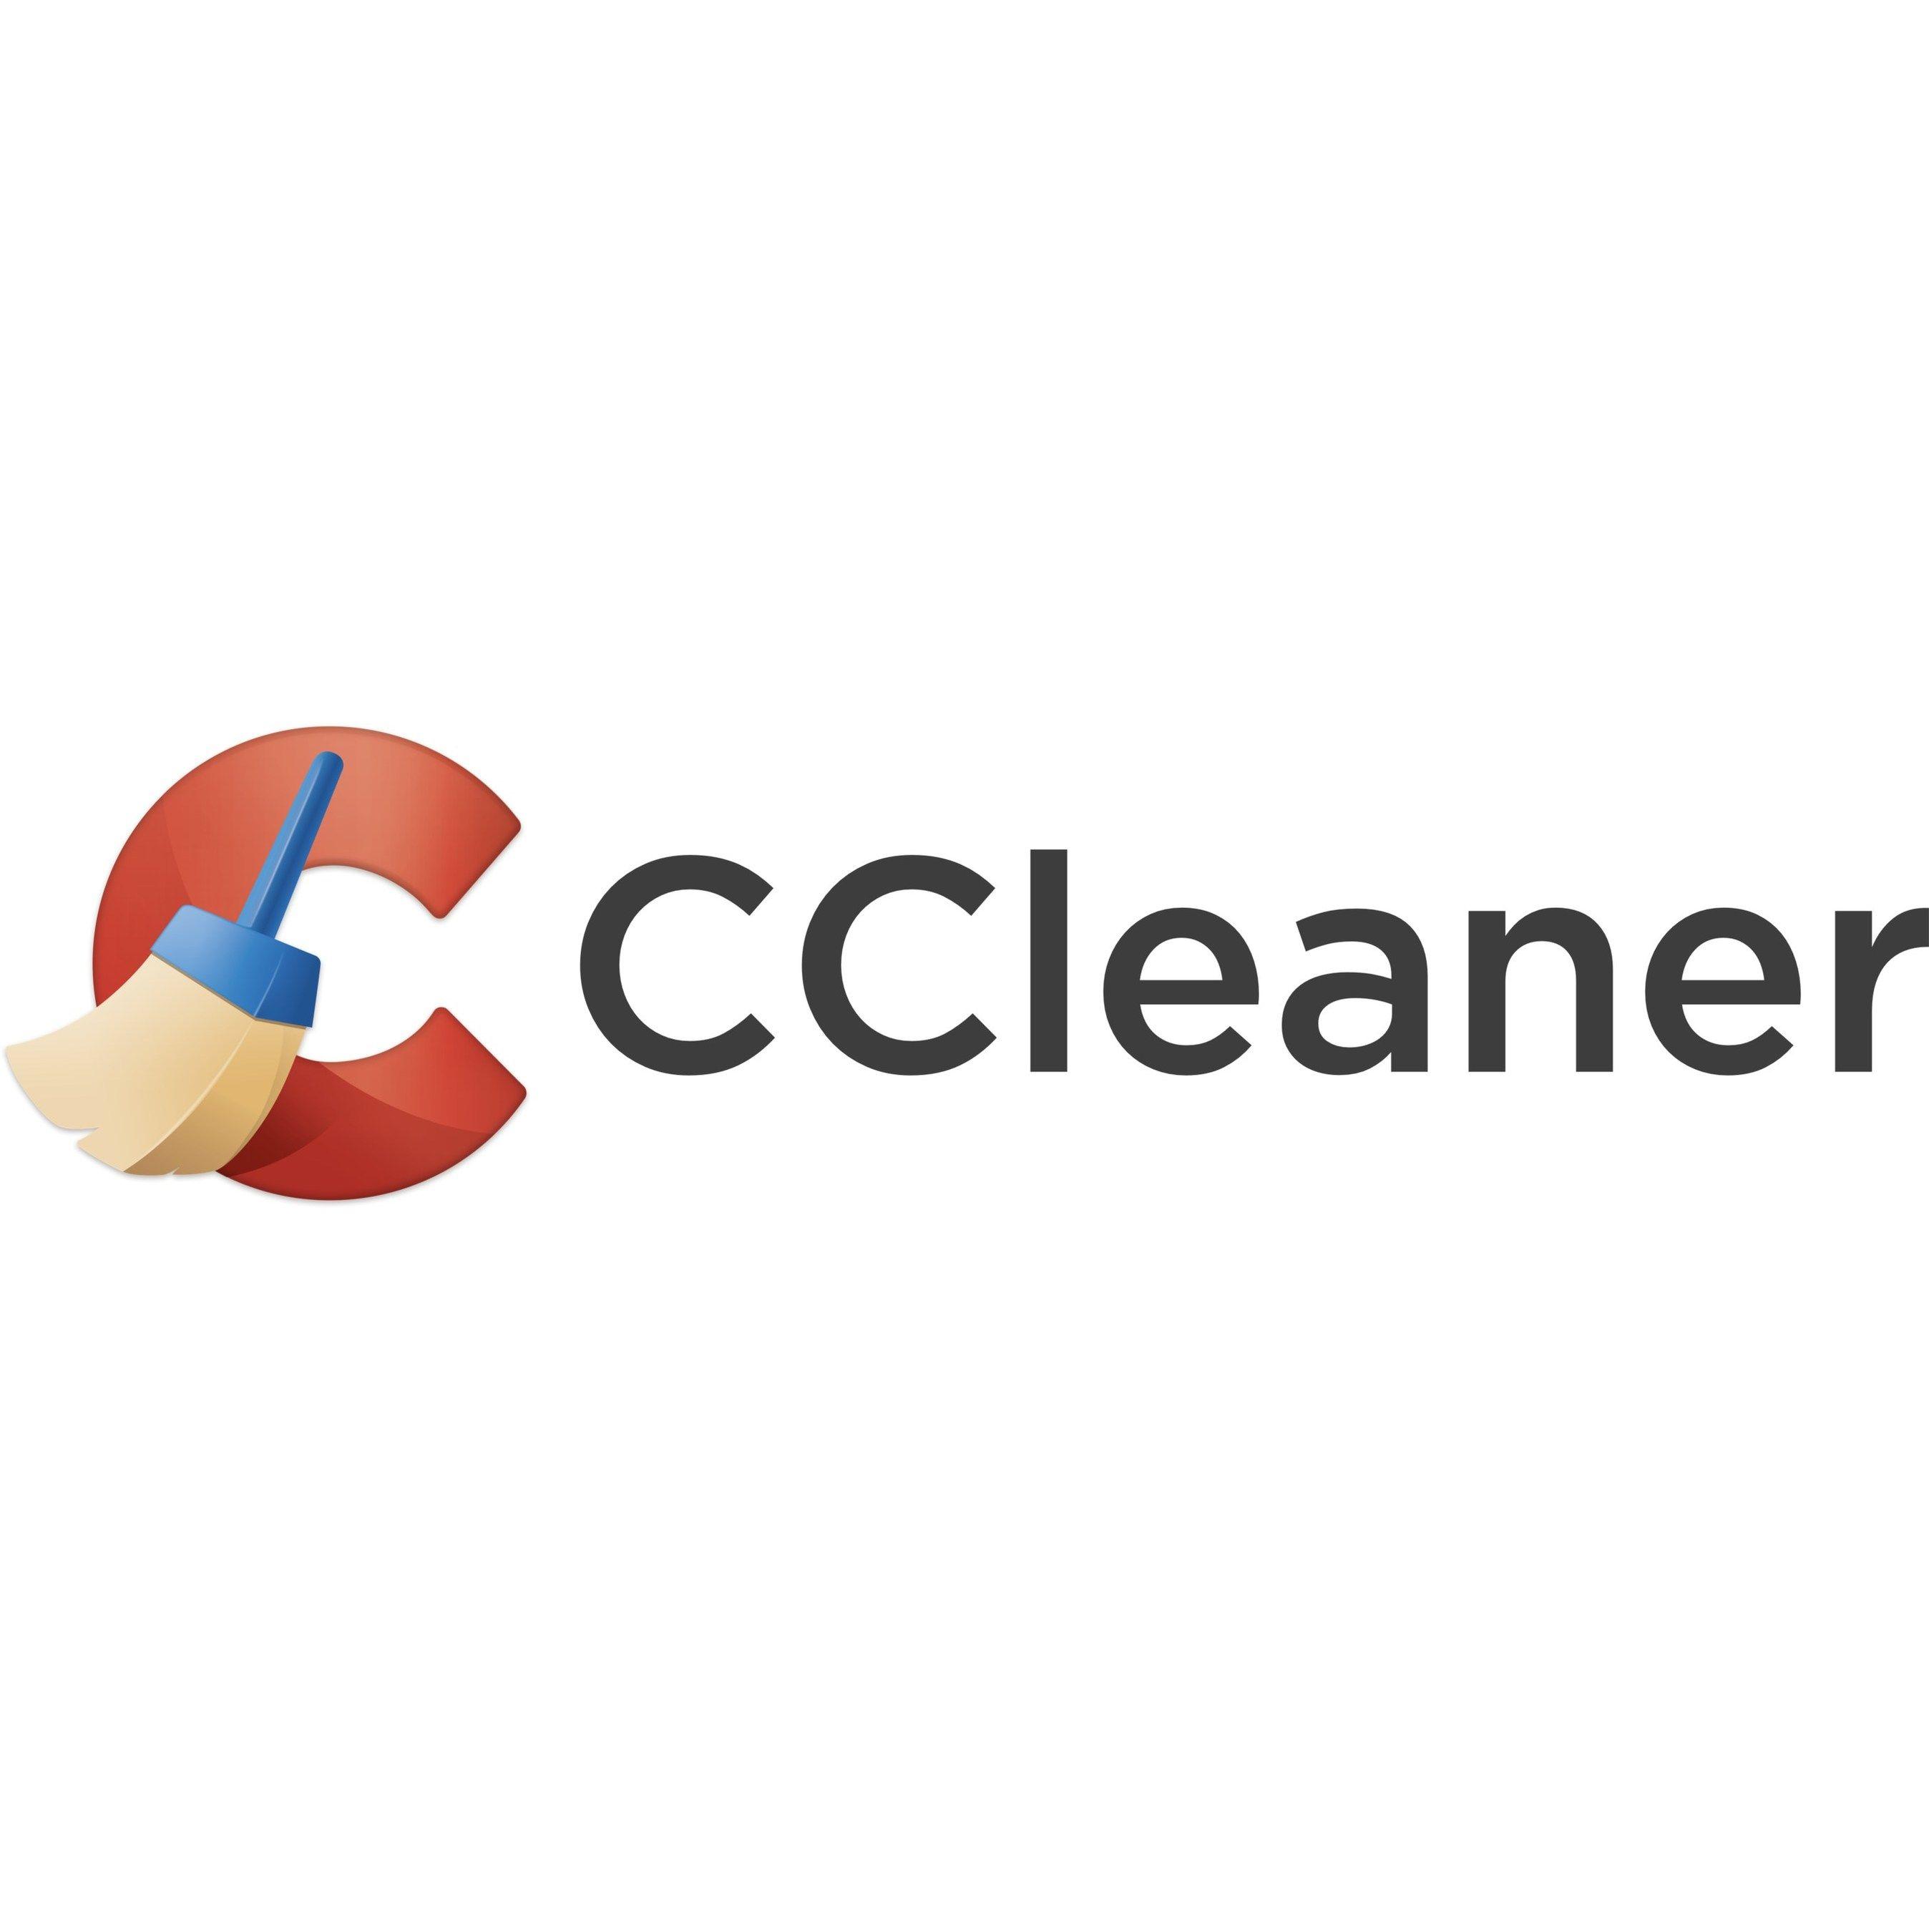 CCleaner Logo - CCleaner Introduces New 'Easy Clean' Feature